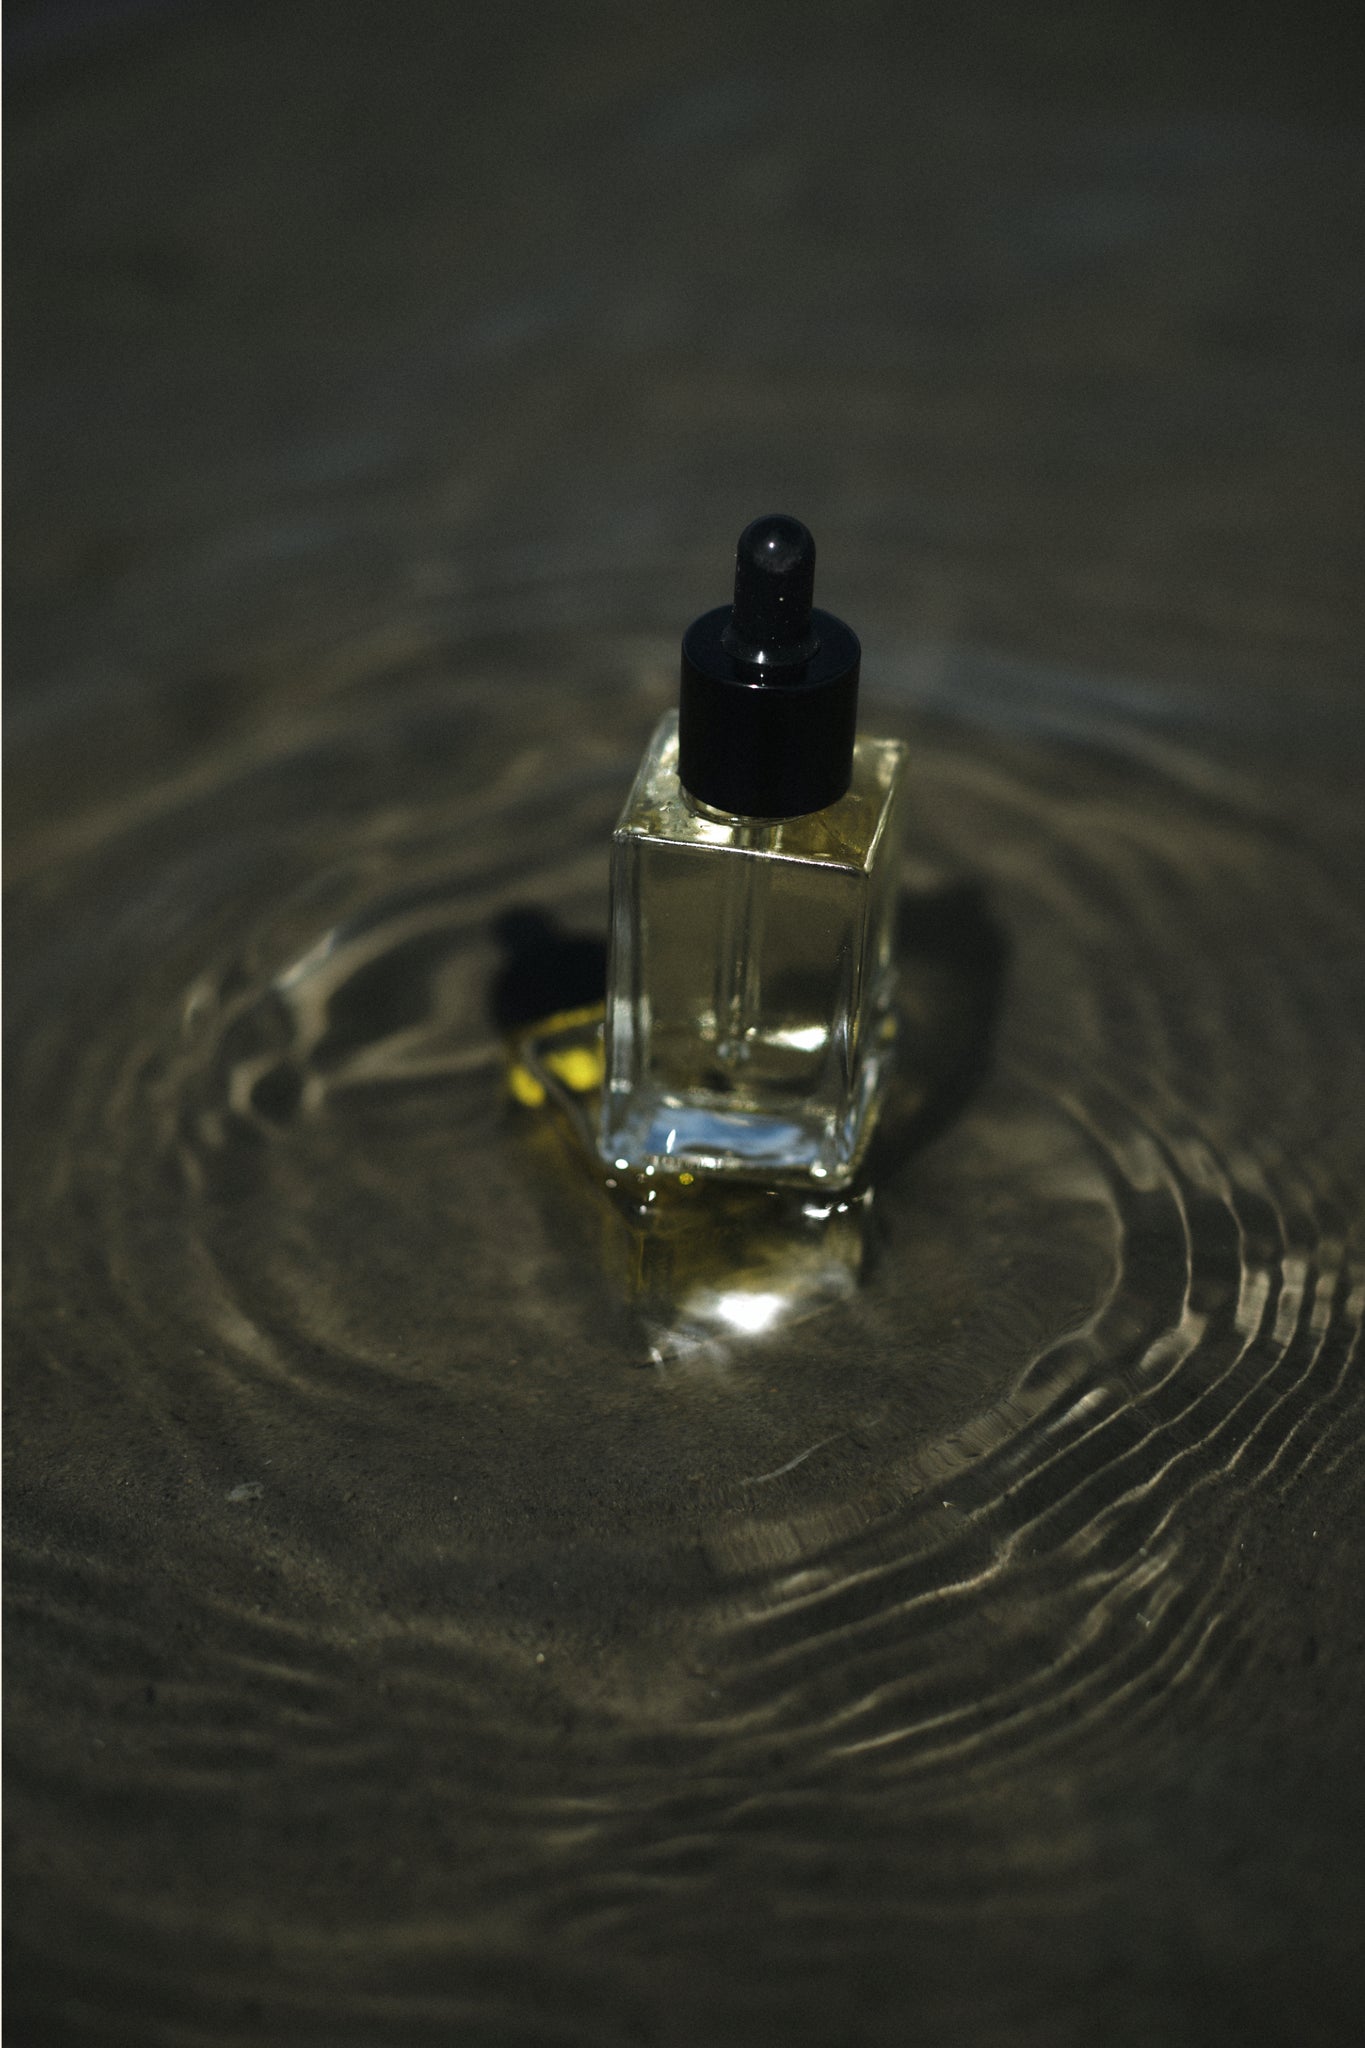 Shave Oil | 40 ml